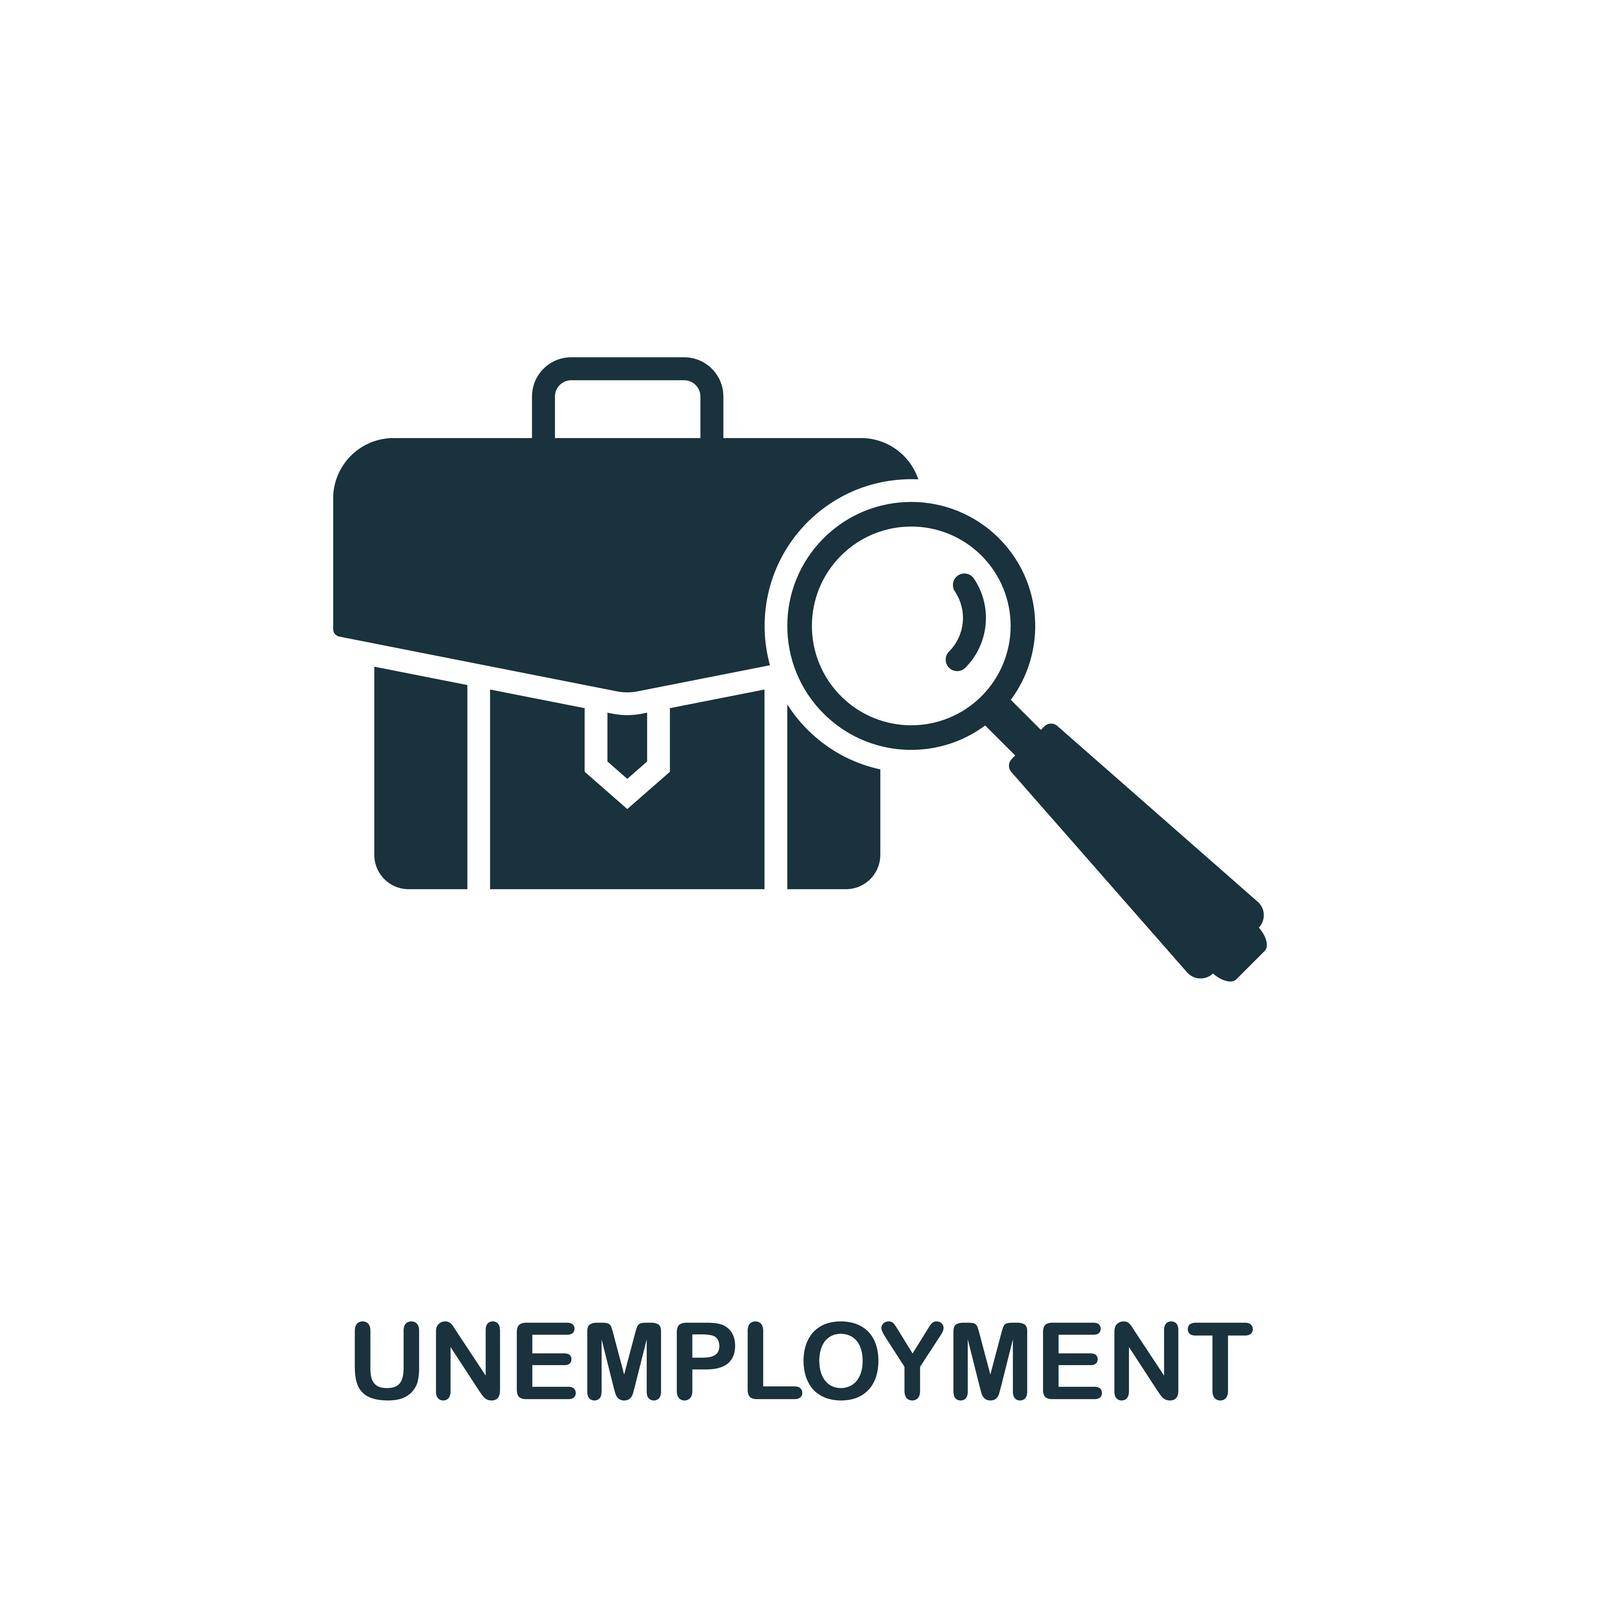 Unemployment icon. Monochrome sign from economic crisis collection. Creative Unemployment icon illustration for web design, infographics and more by simakovavector